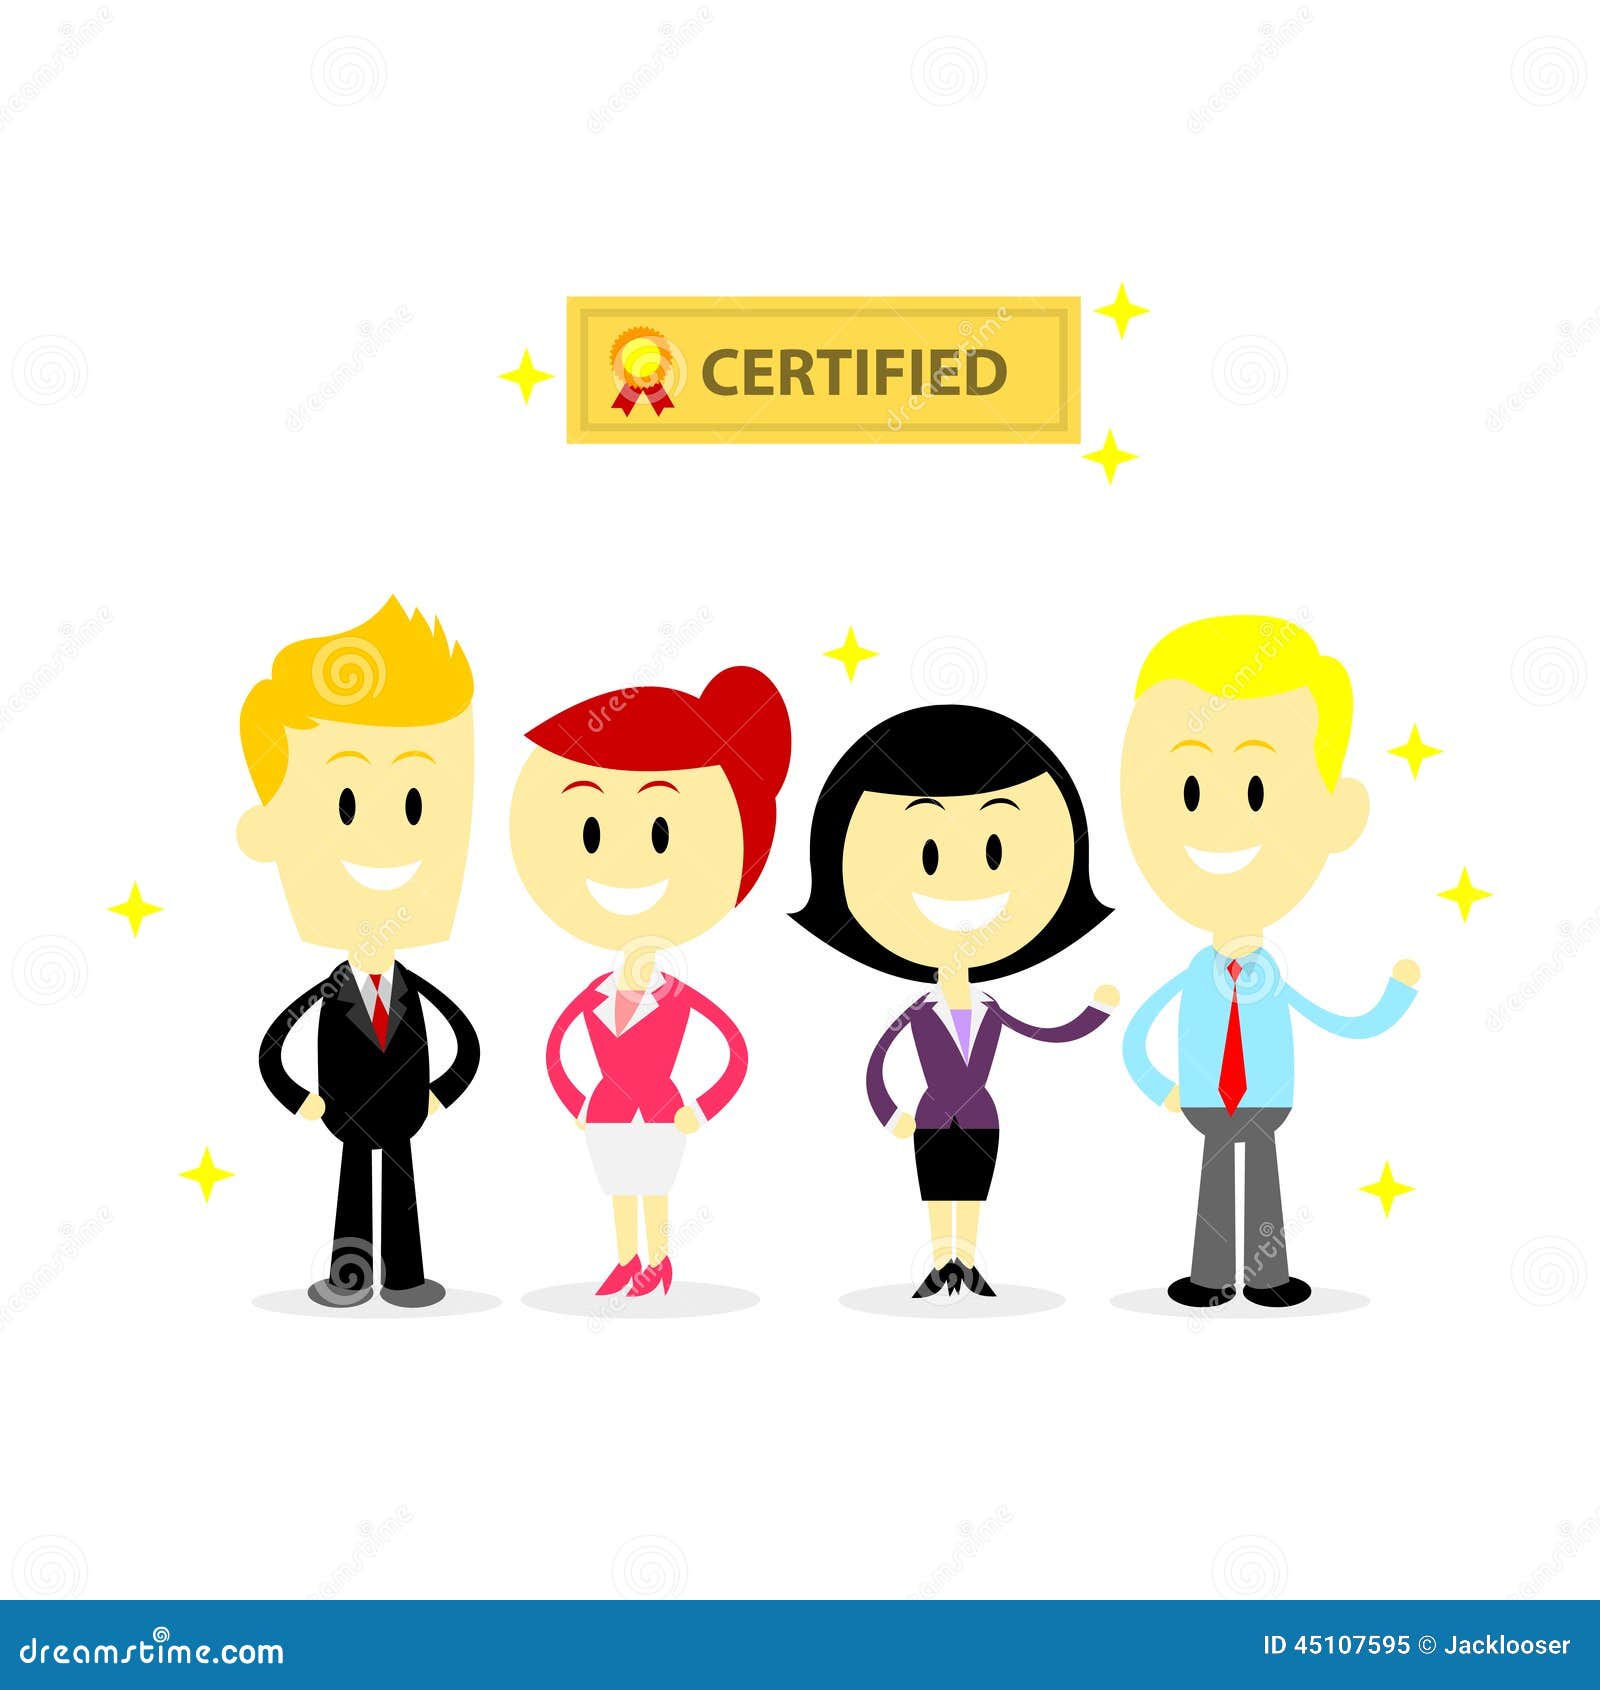 Certified Professional Employees Stock Vector - Image: 45107595